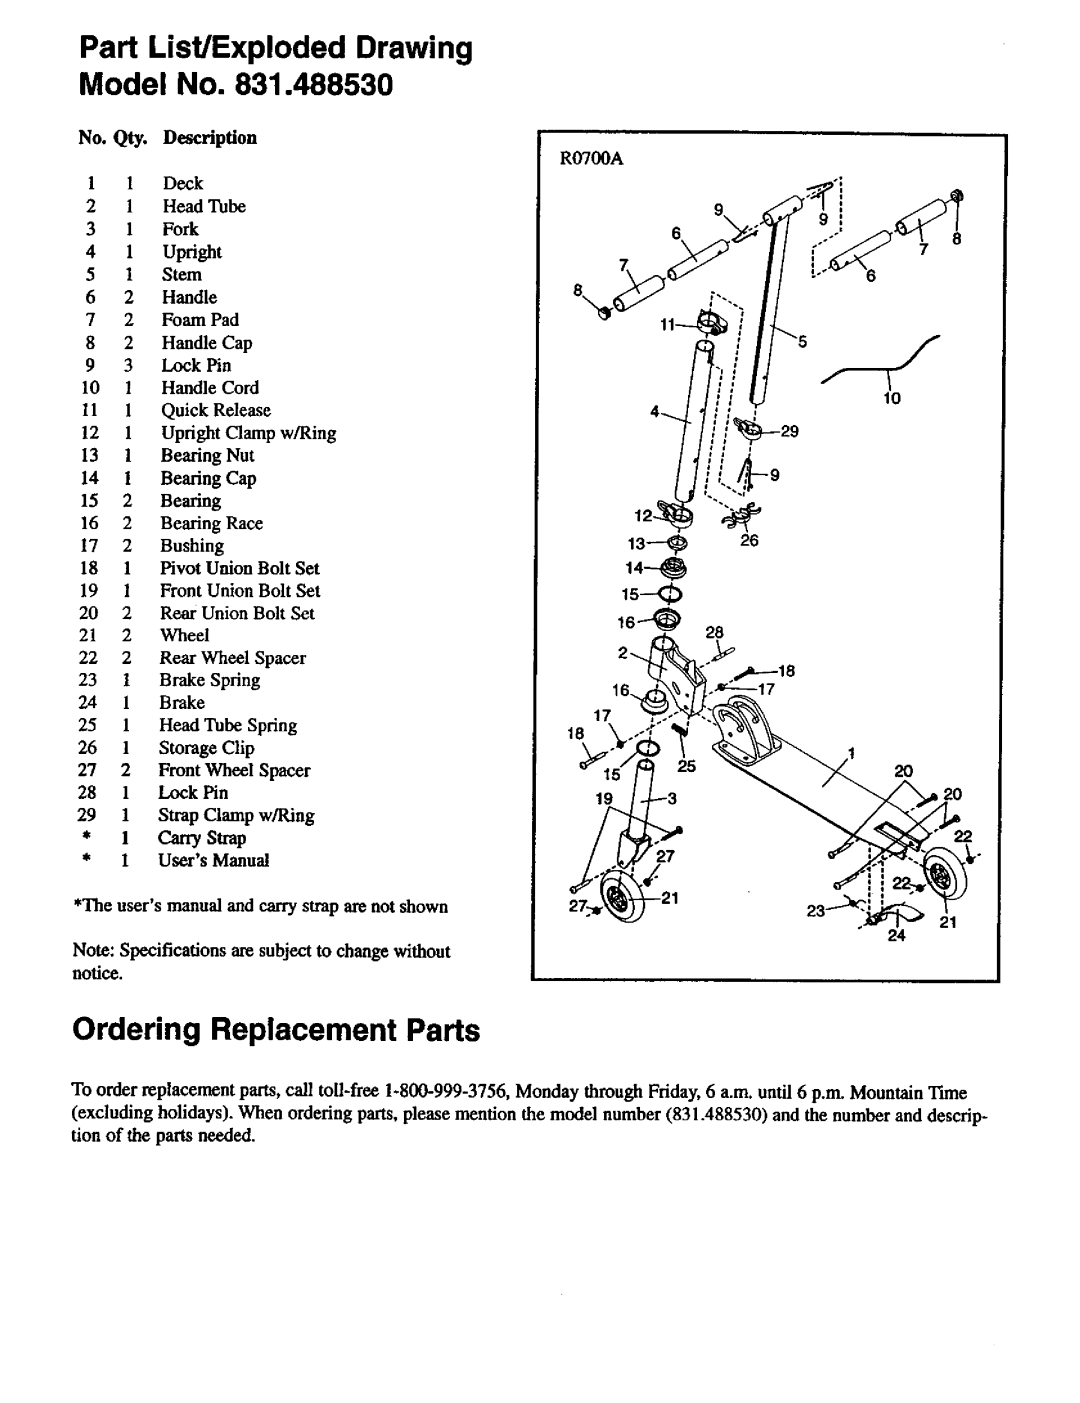 Blade ICE 831.48853 user manual Part List/Exploded Drawing Model No, Ordering Replacement Parts 